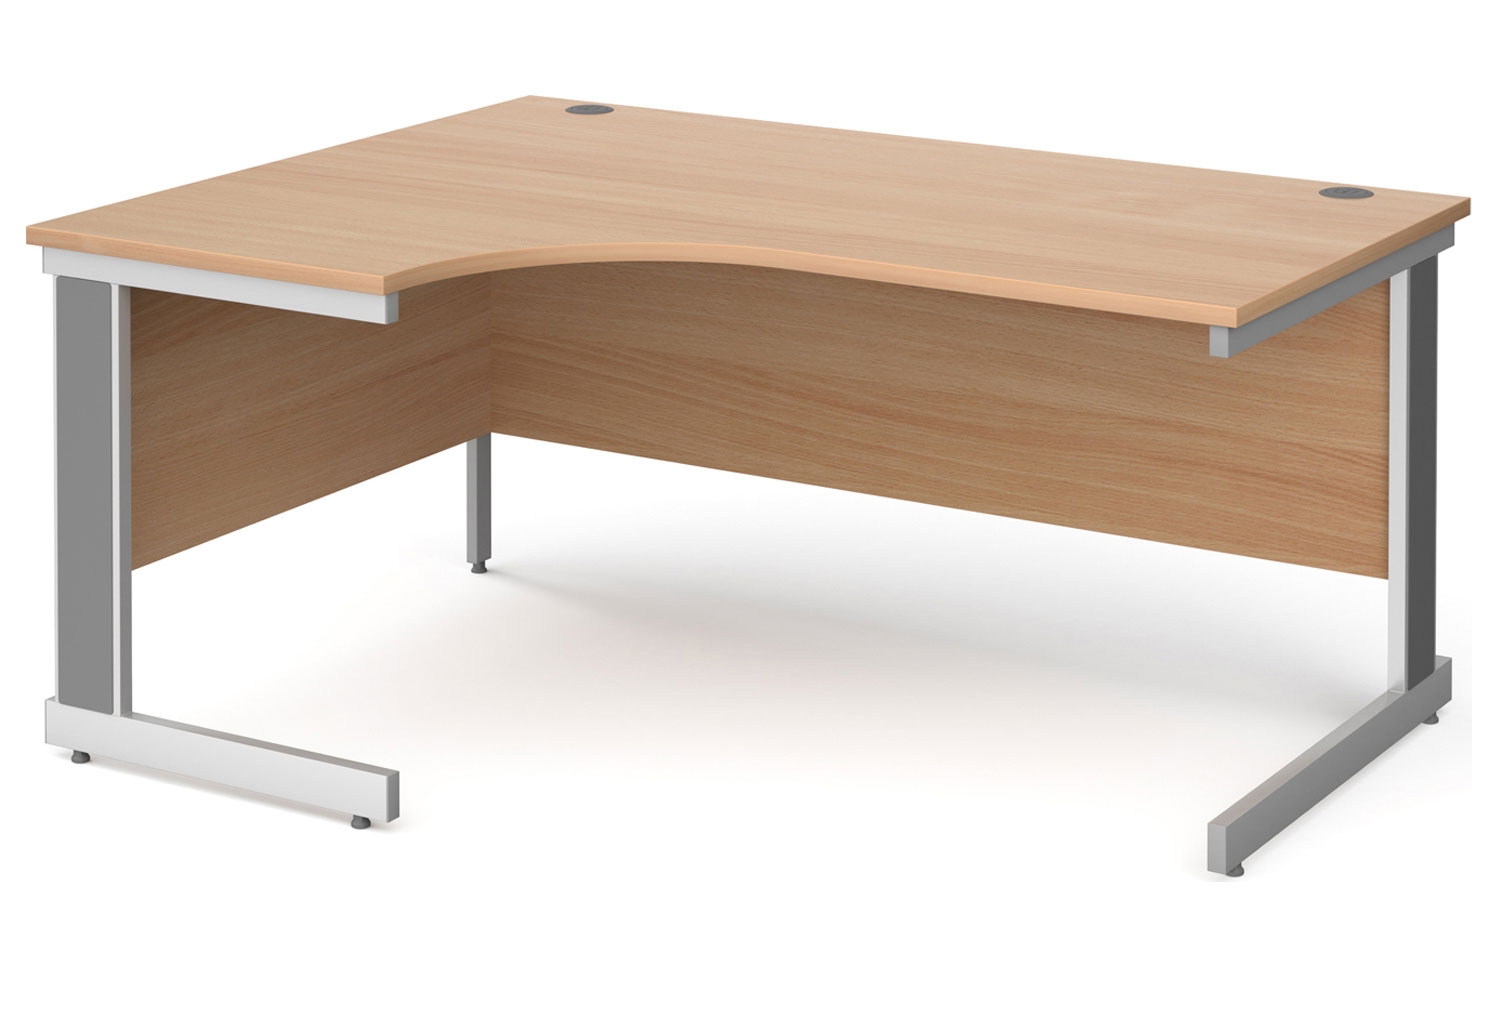 Tully Deluxe Left Hand Ergonomic Office Desk, 160wx120/80dx73h (cm), Beech, Express Delivery